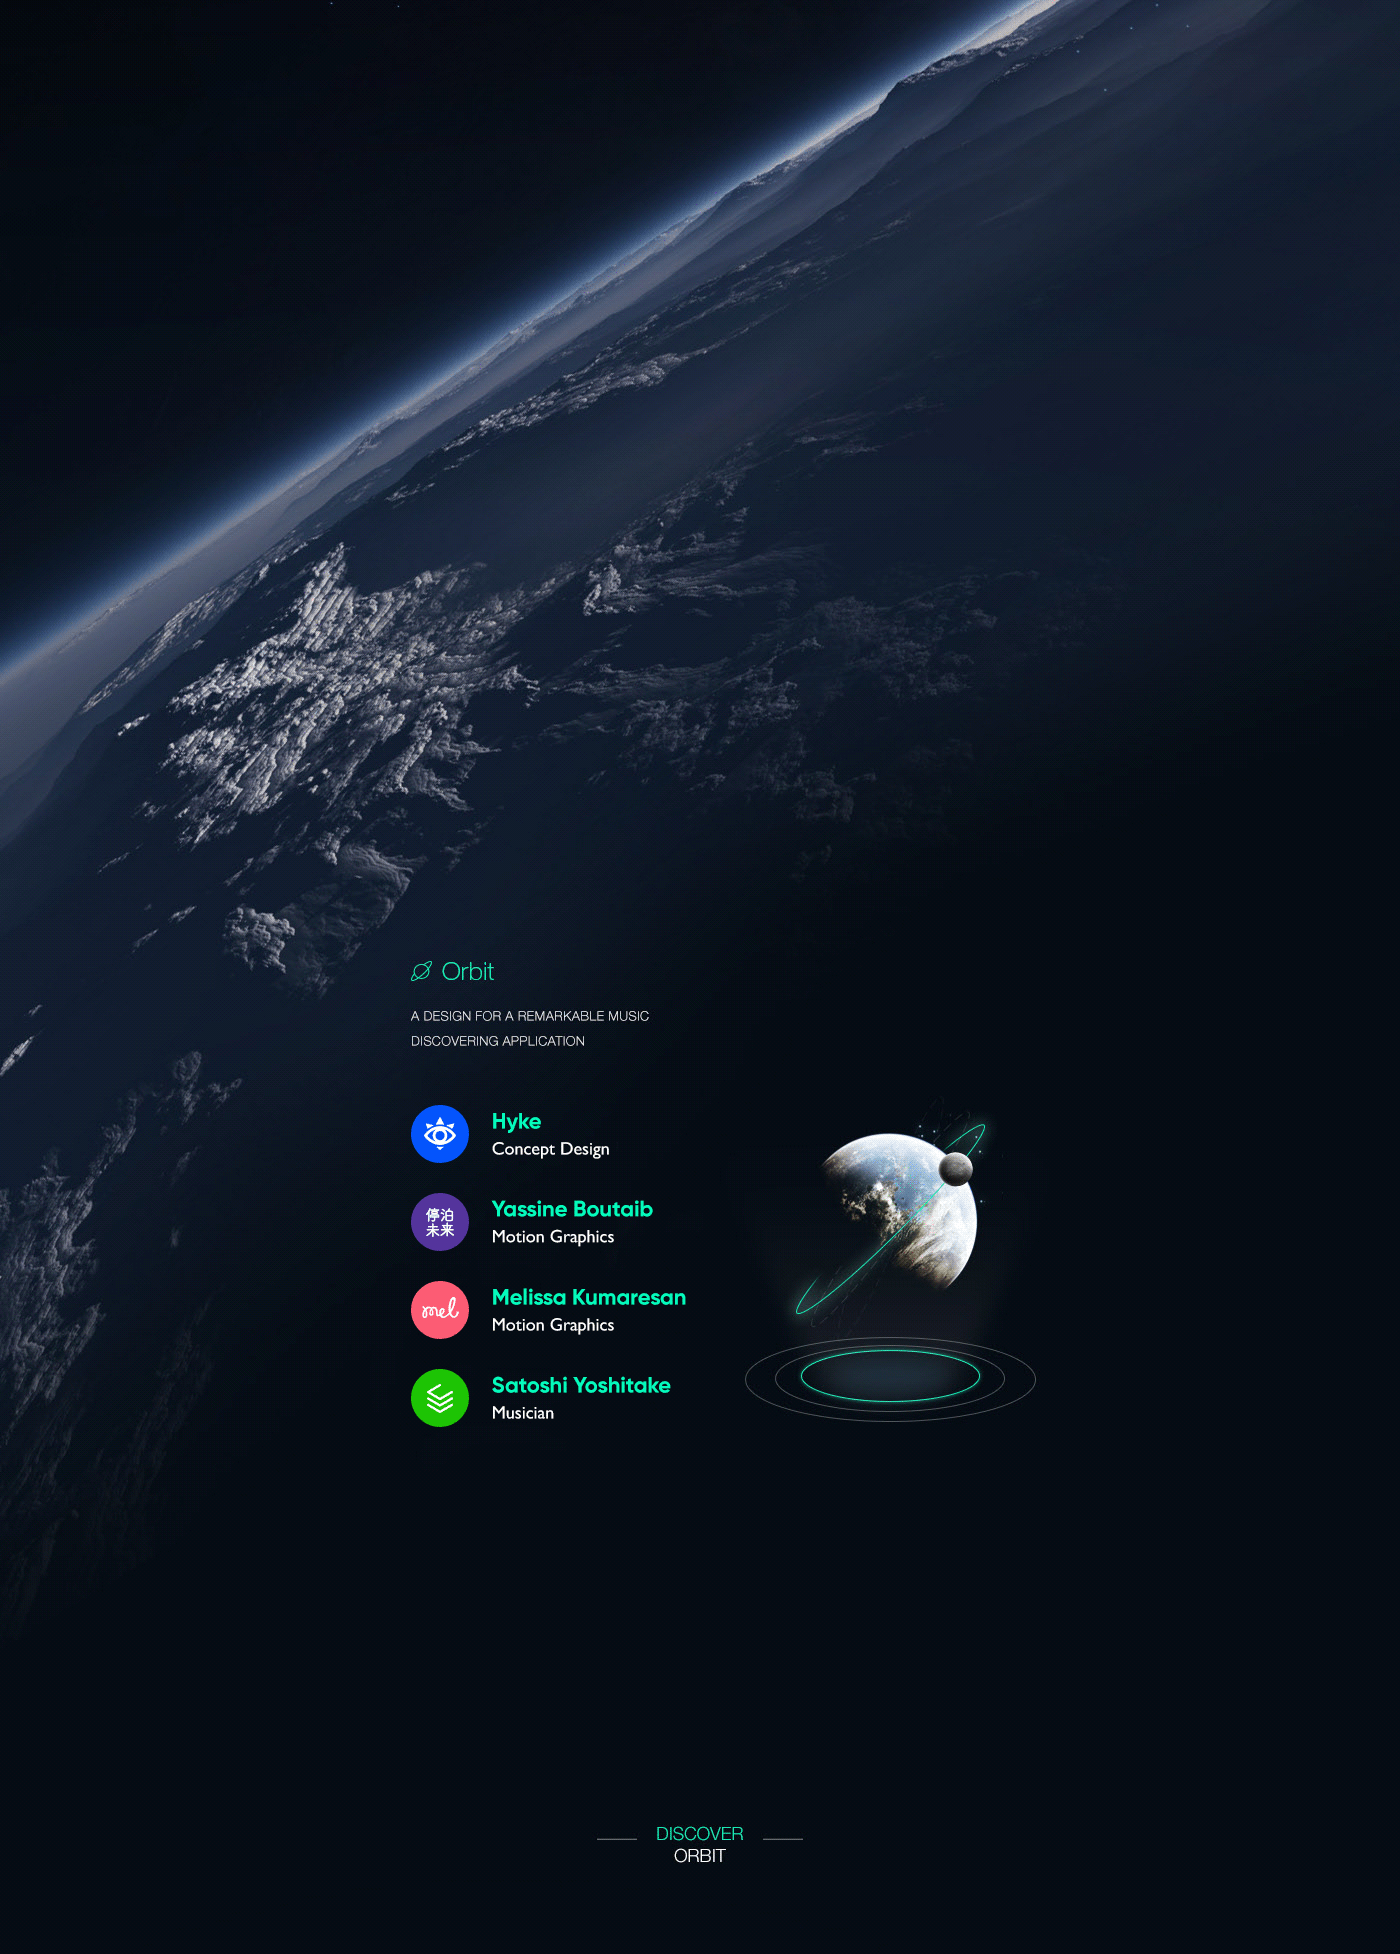 Musical exploring application mobile apple watch popo Ediso discovering Orbit network minimal Space  nebula Planets